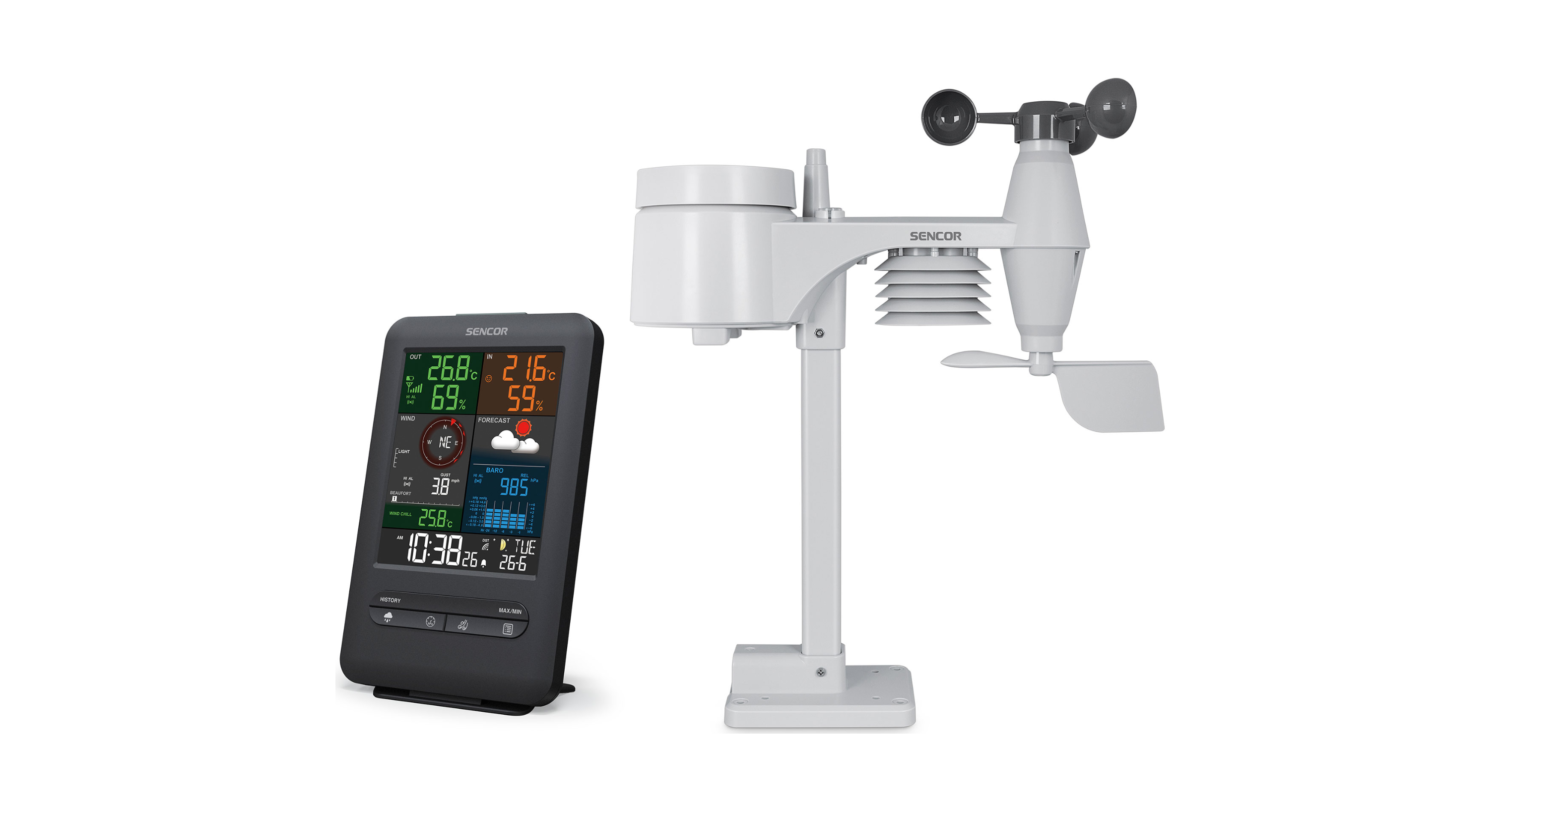 SENCOR SWS 9300 Color Weather Station with 5-In-1 Sensor User Manual